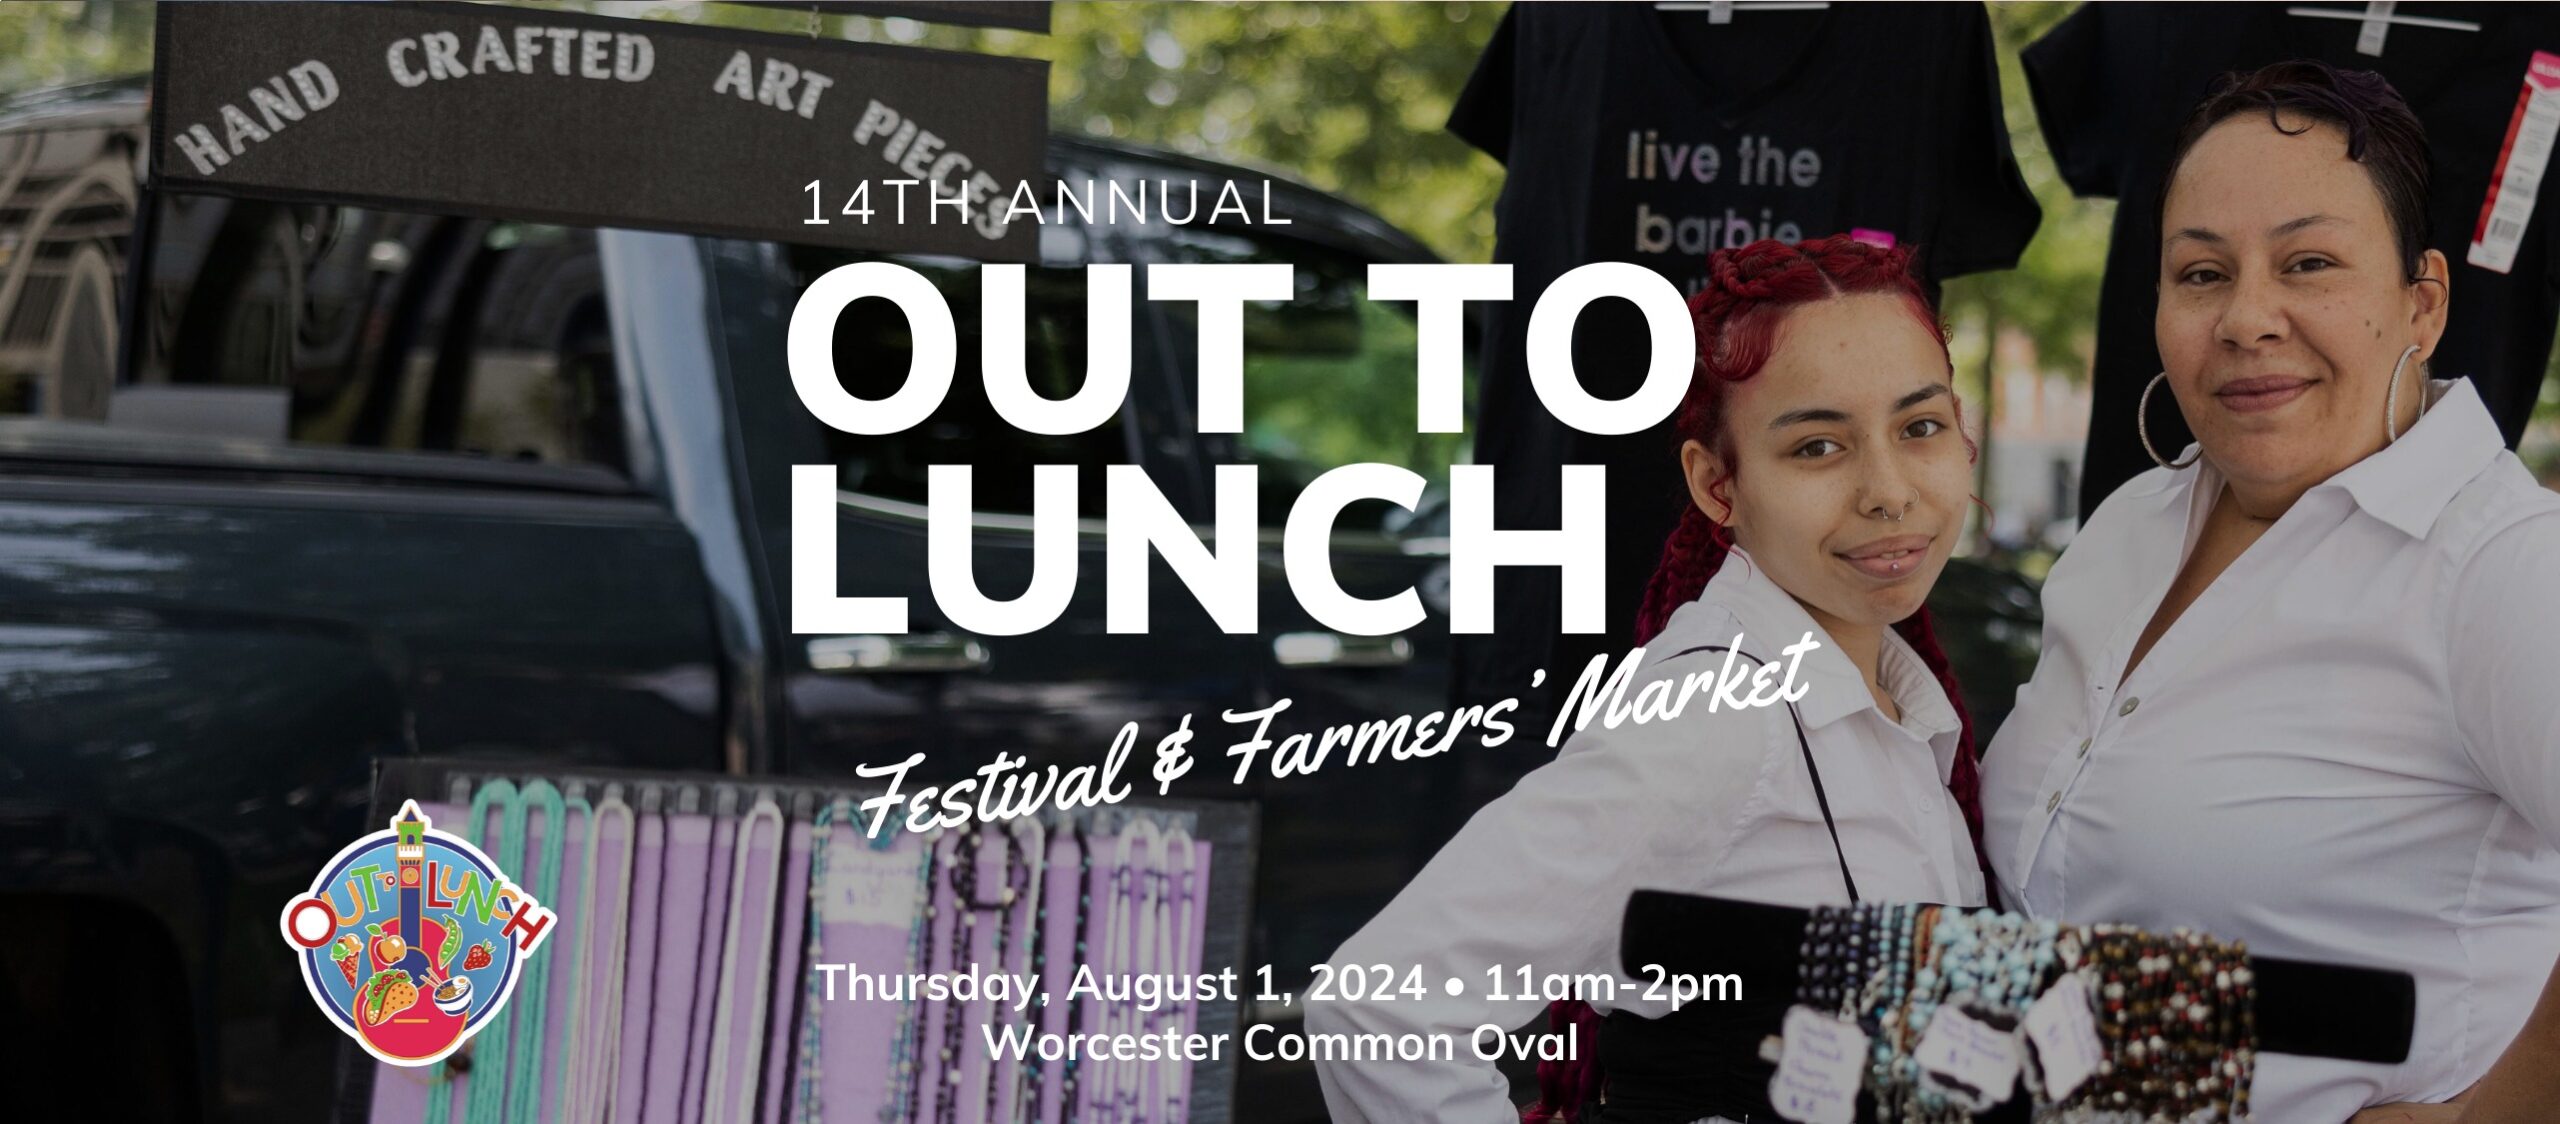 Out to Lunch Event in the Worcester Common on 8/1/24. CLW will have a table during this event.